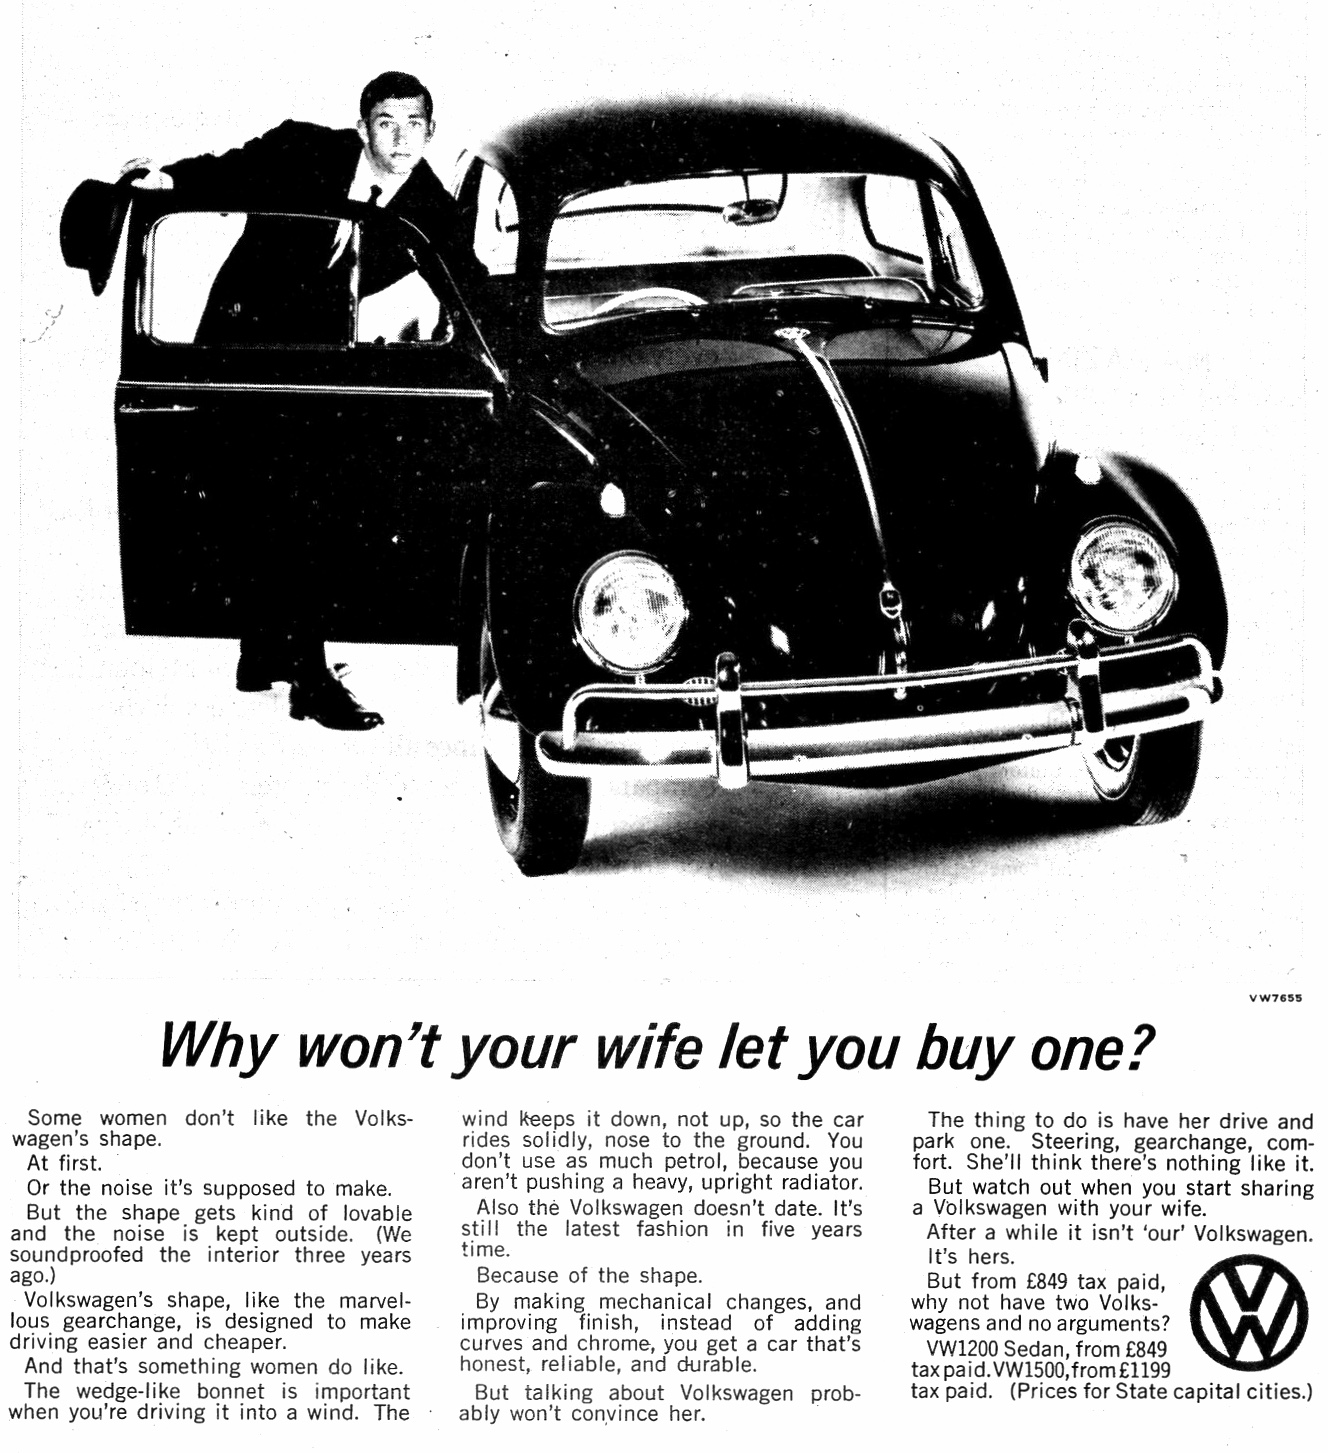 1962 Volkswagen Beetle - Why Won't Your Wife Let You Buy One